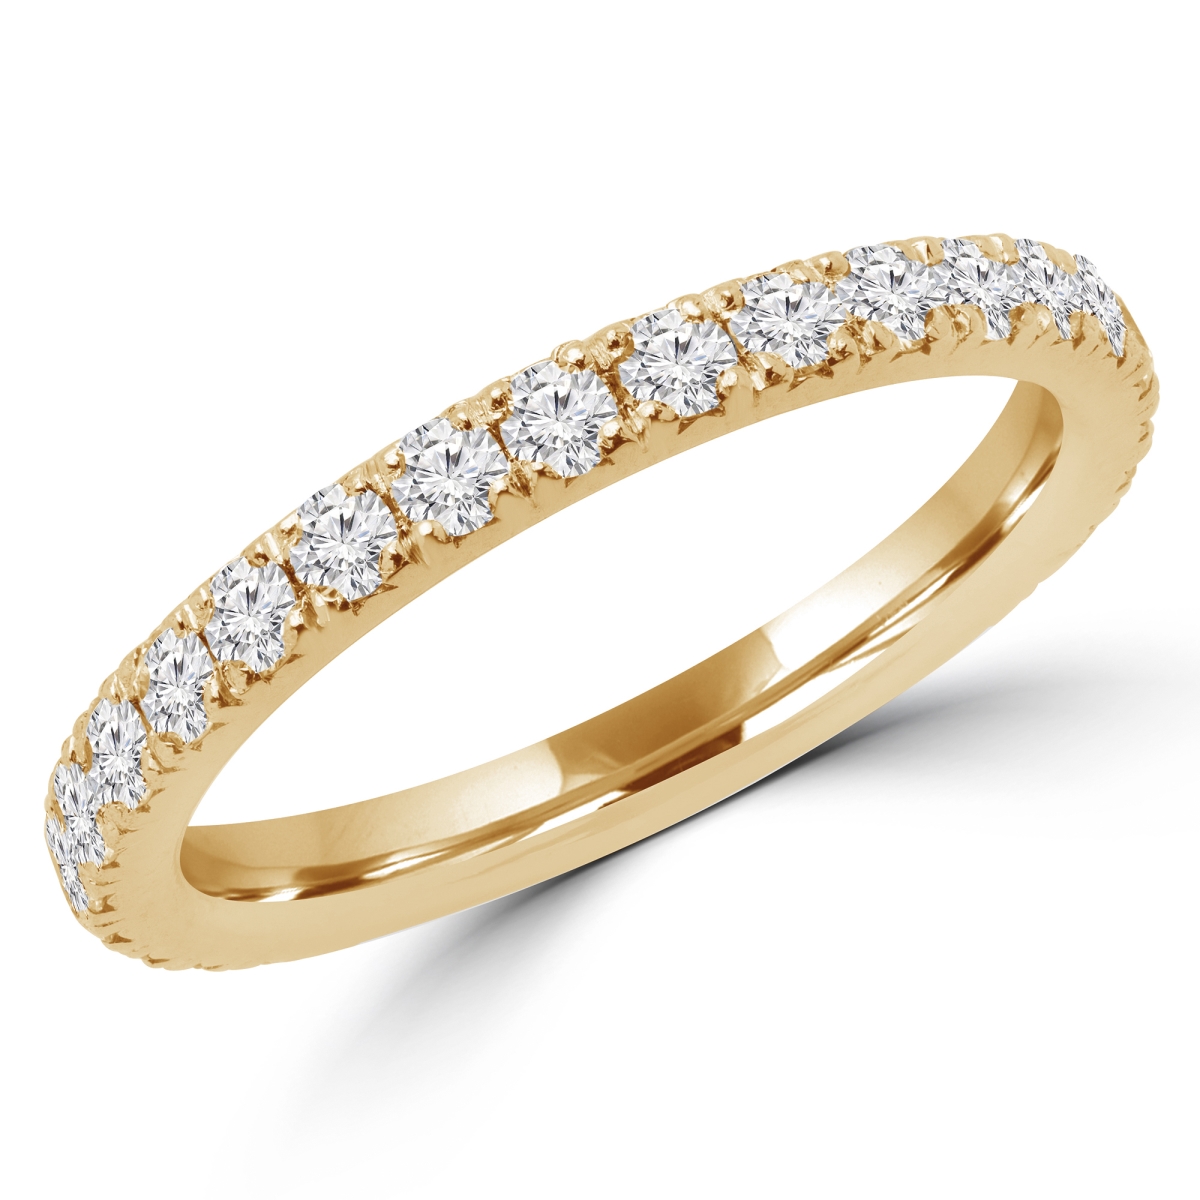 Picture of Majesty Diamonds MD180192-4.25 0.6 CTW Round Diamond Semi-Eternity Wedding Band Ring in 14K Yellow Gold - Size 4.25